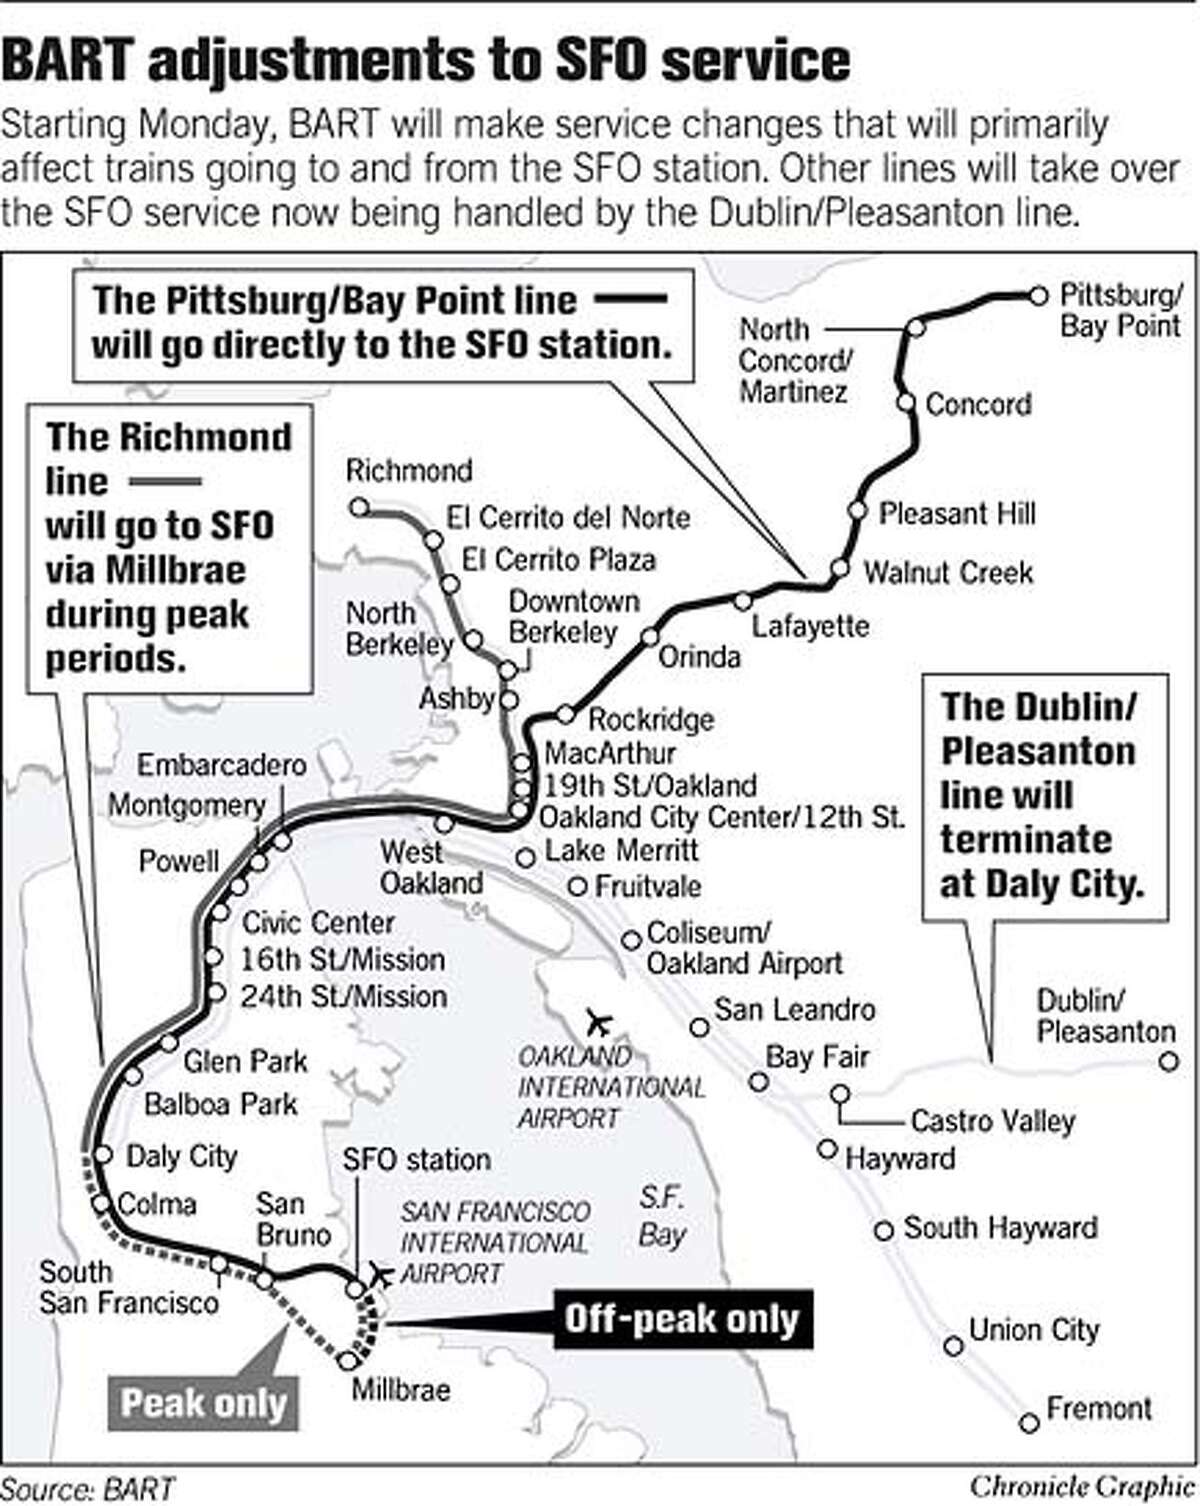 BART Adjustments to SFO Service. Chronicle Graphic